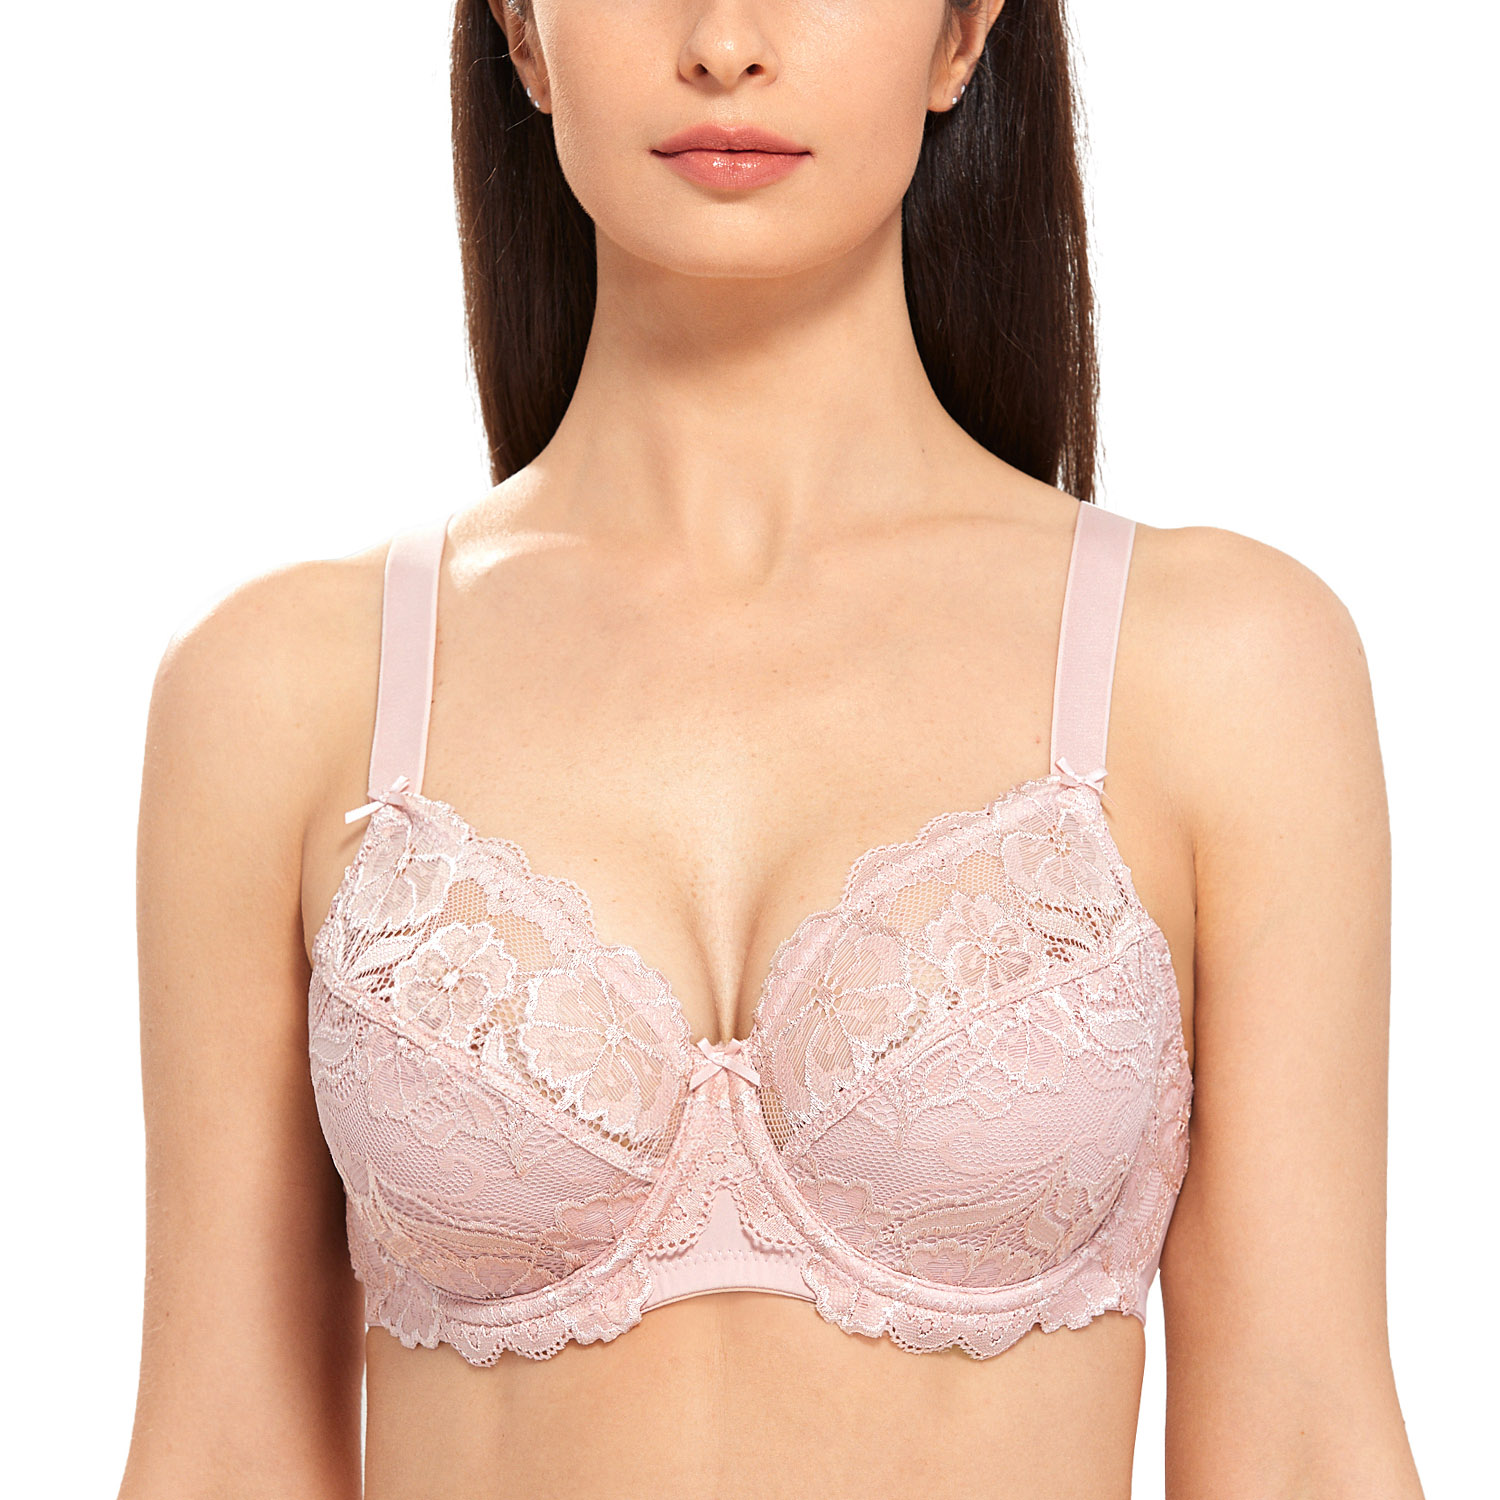 Women's Full Coverage Bra Underwired No Padding Floral Lace Plus Size